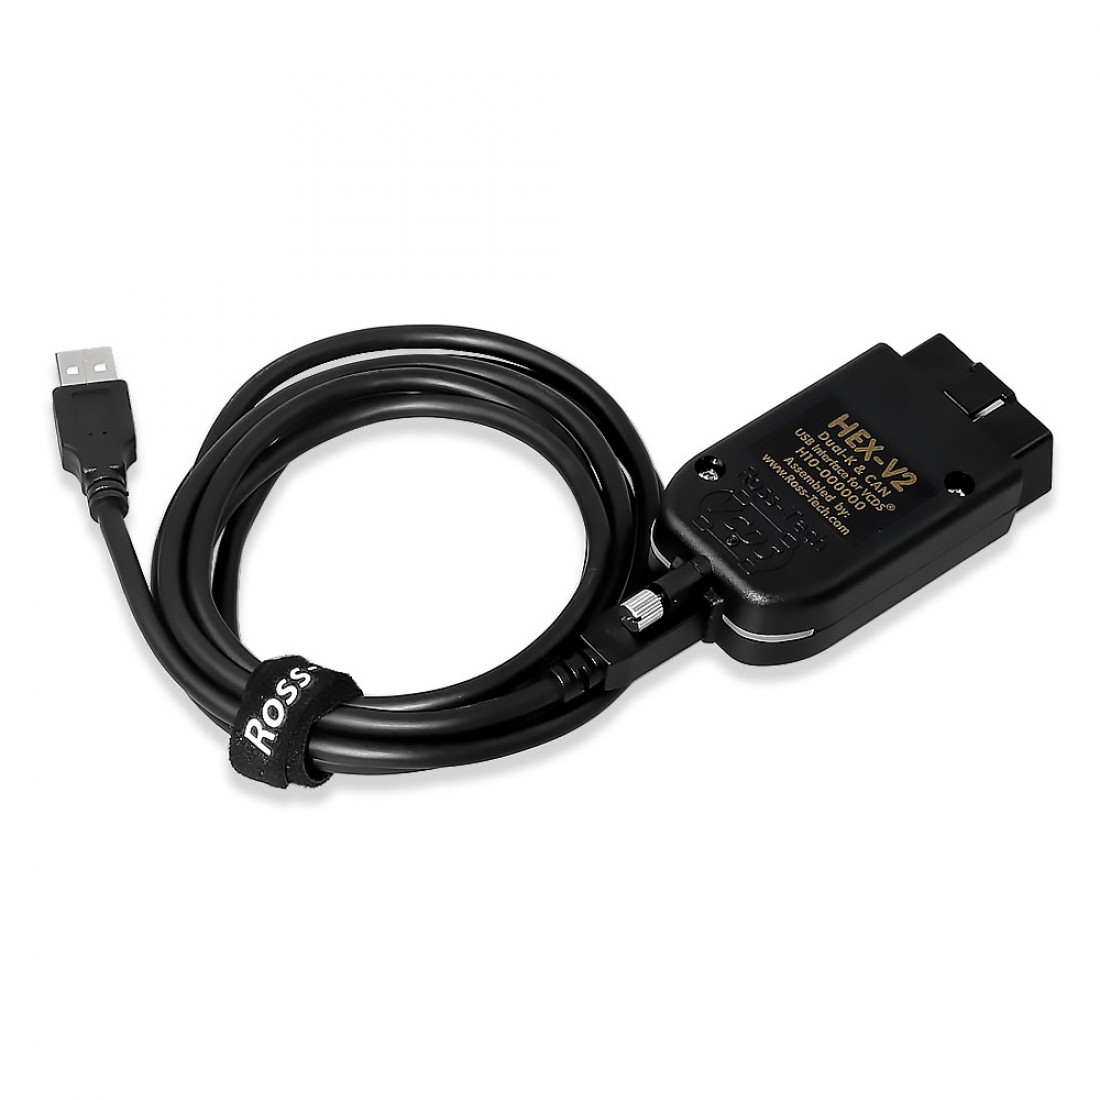 vcds cables